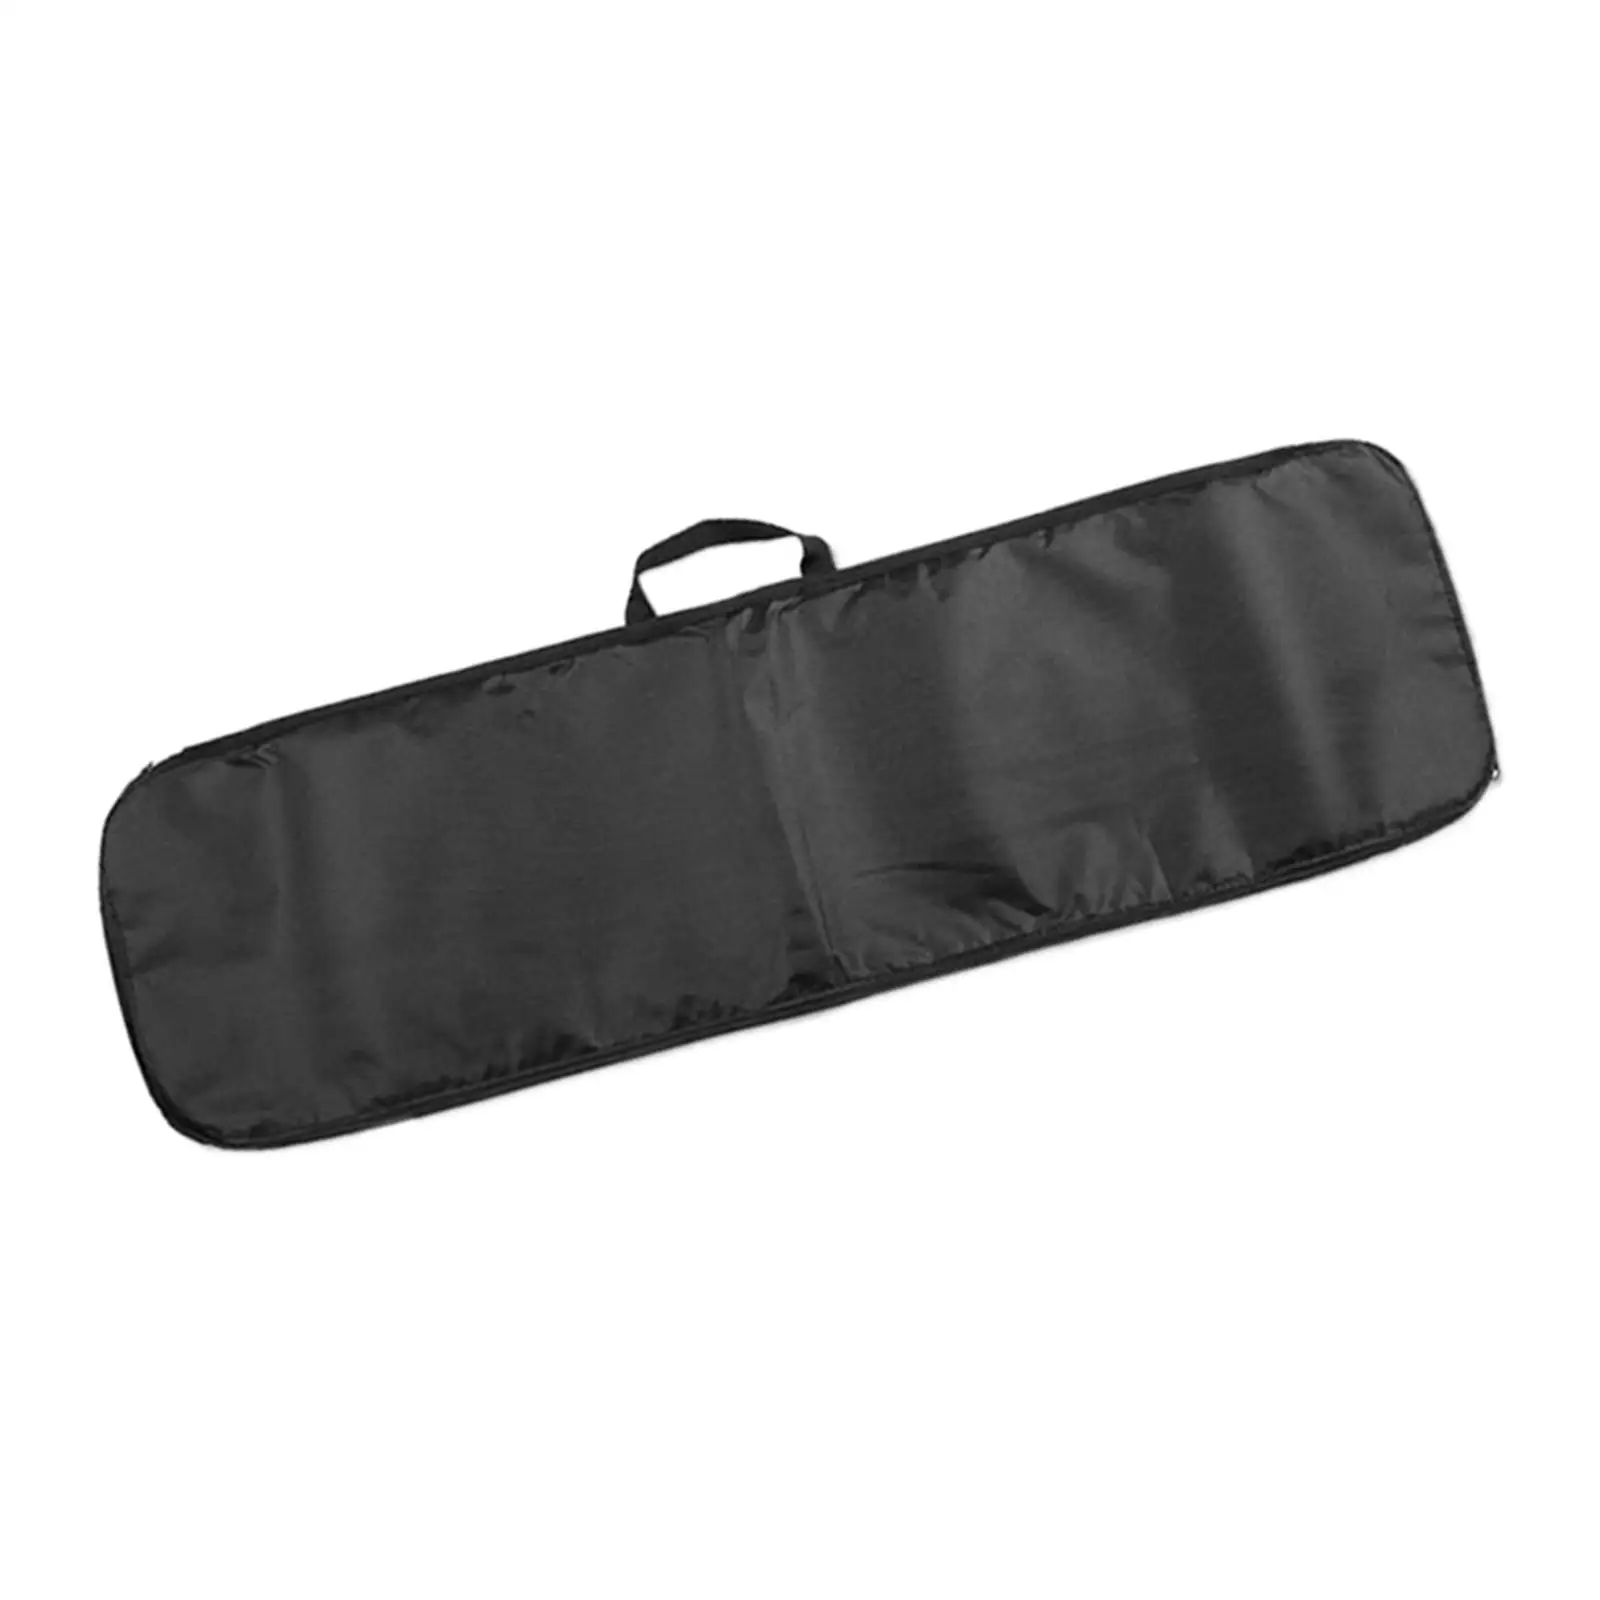 Kayak Paddle Bag Paddle Blade Storage Holder Tote with Handles Pouch Case for Surfing Boating Kayaking Stand up Paddle Canoeing